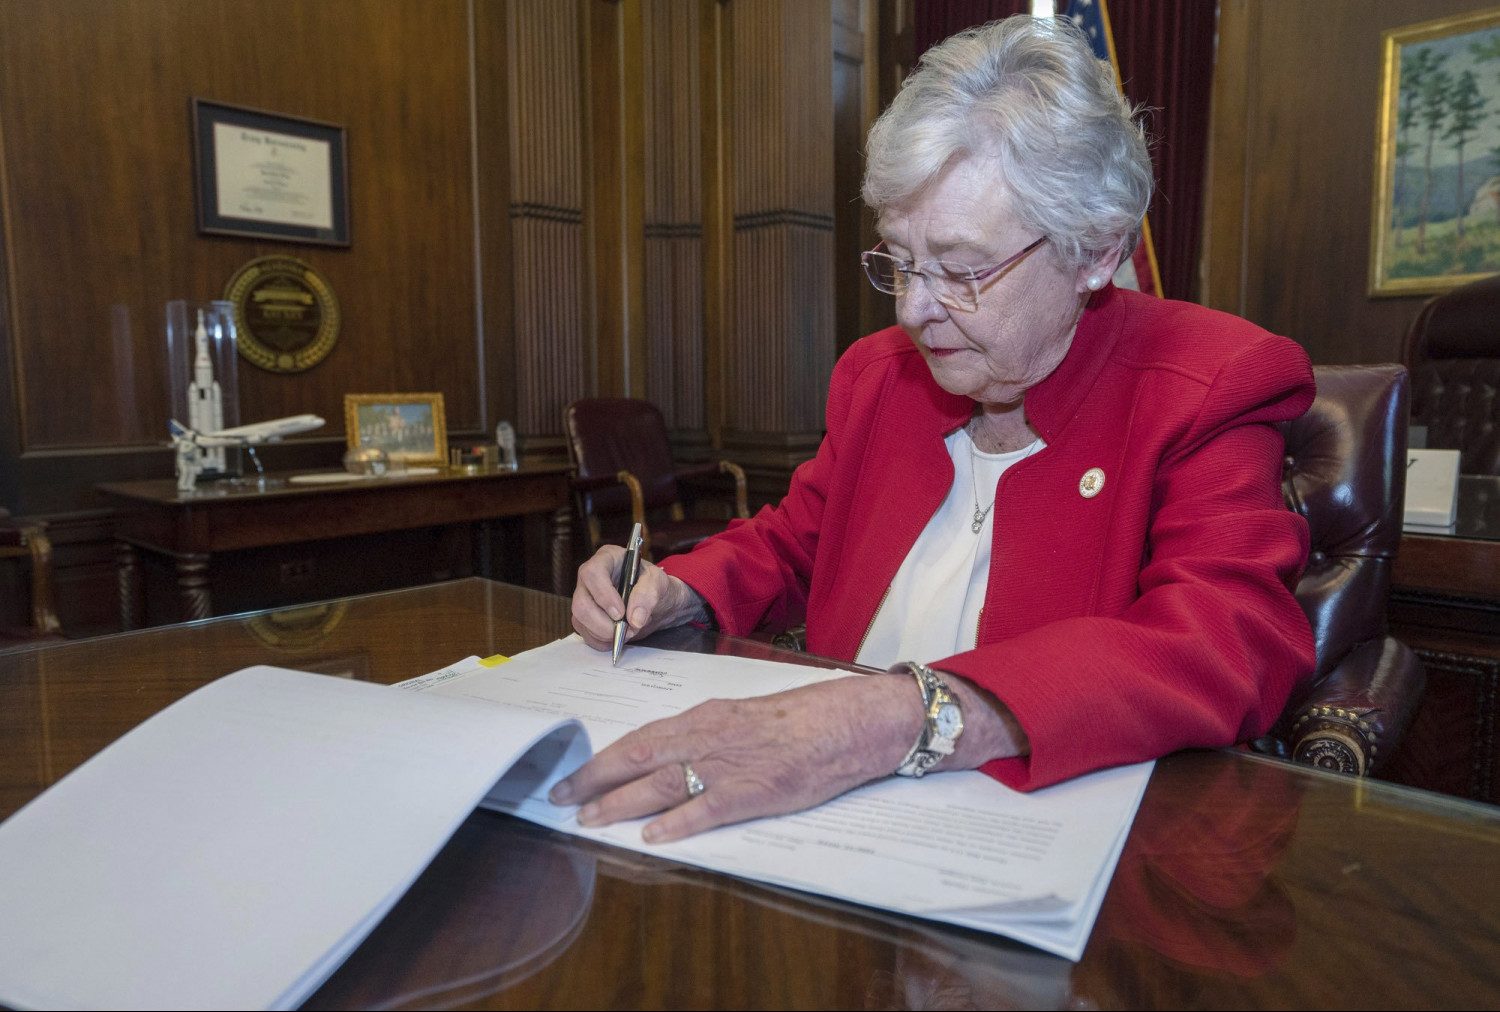 Alabama Gov. Kay Ivey Says She Is Getting Radiation Treatments for Cancer